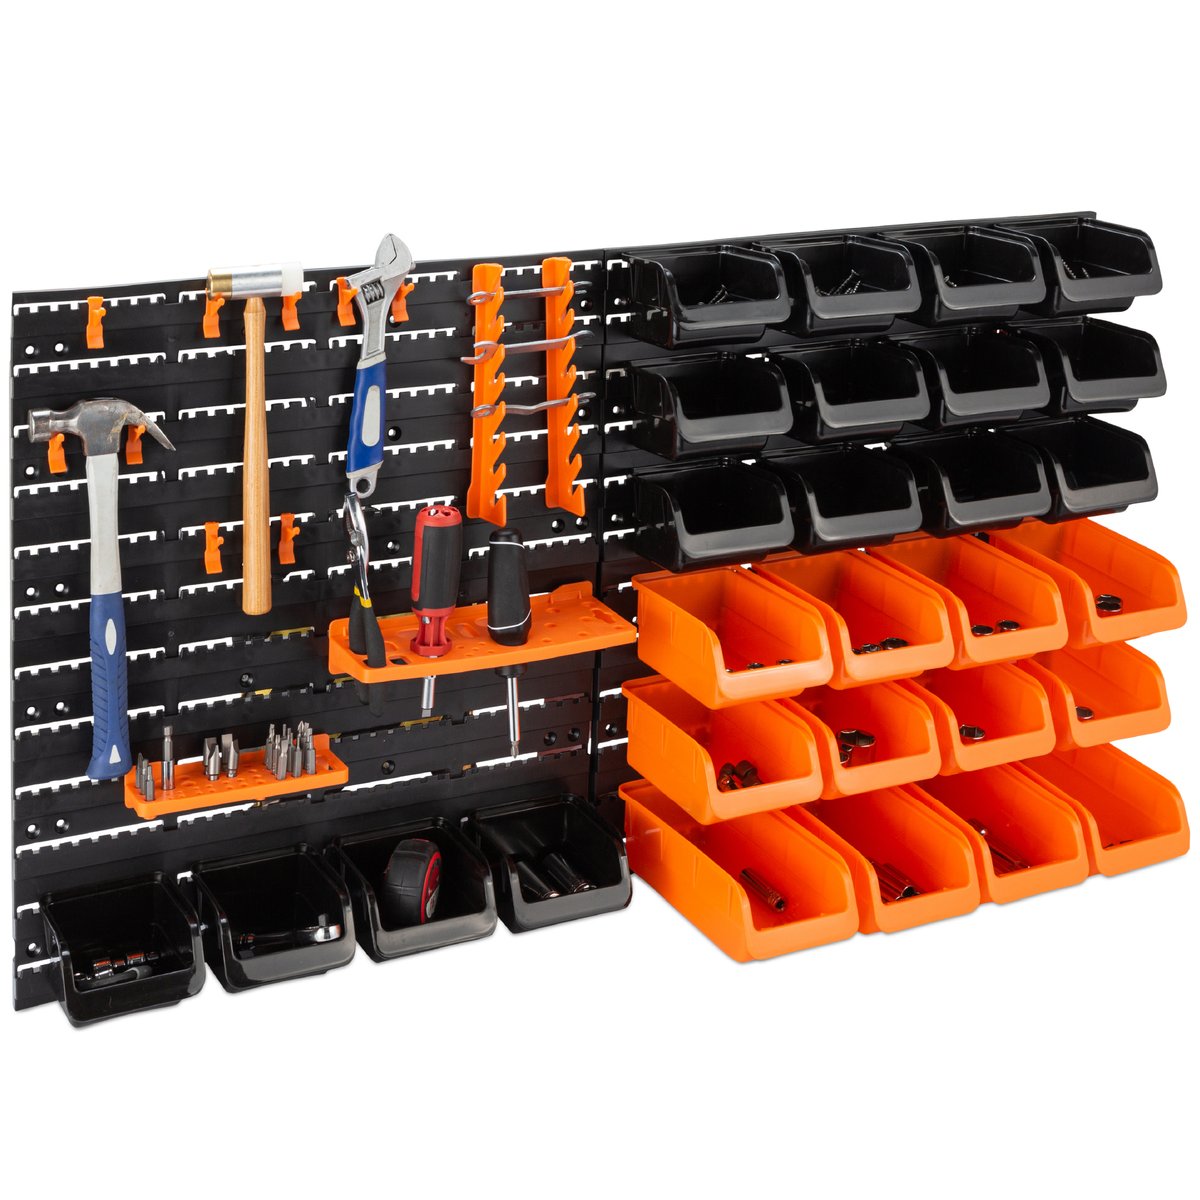 44-Piece Customizable Wall Mounted Storage Rack & Tool Organizer for $36.99 + F/S